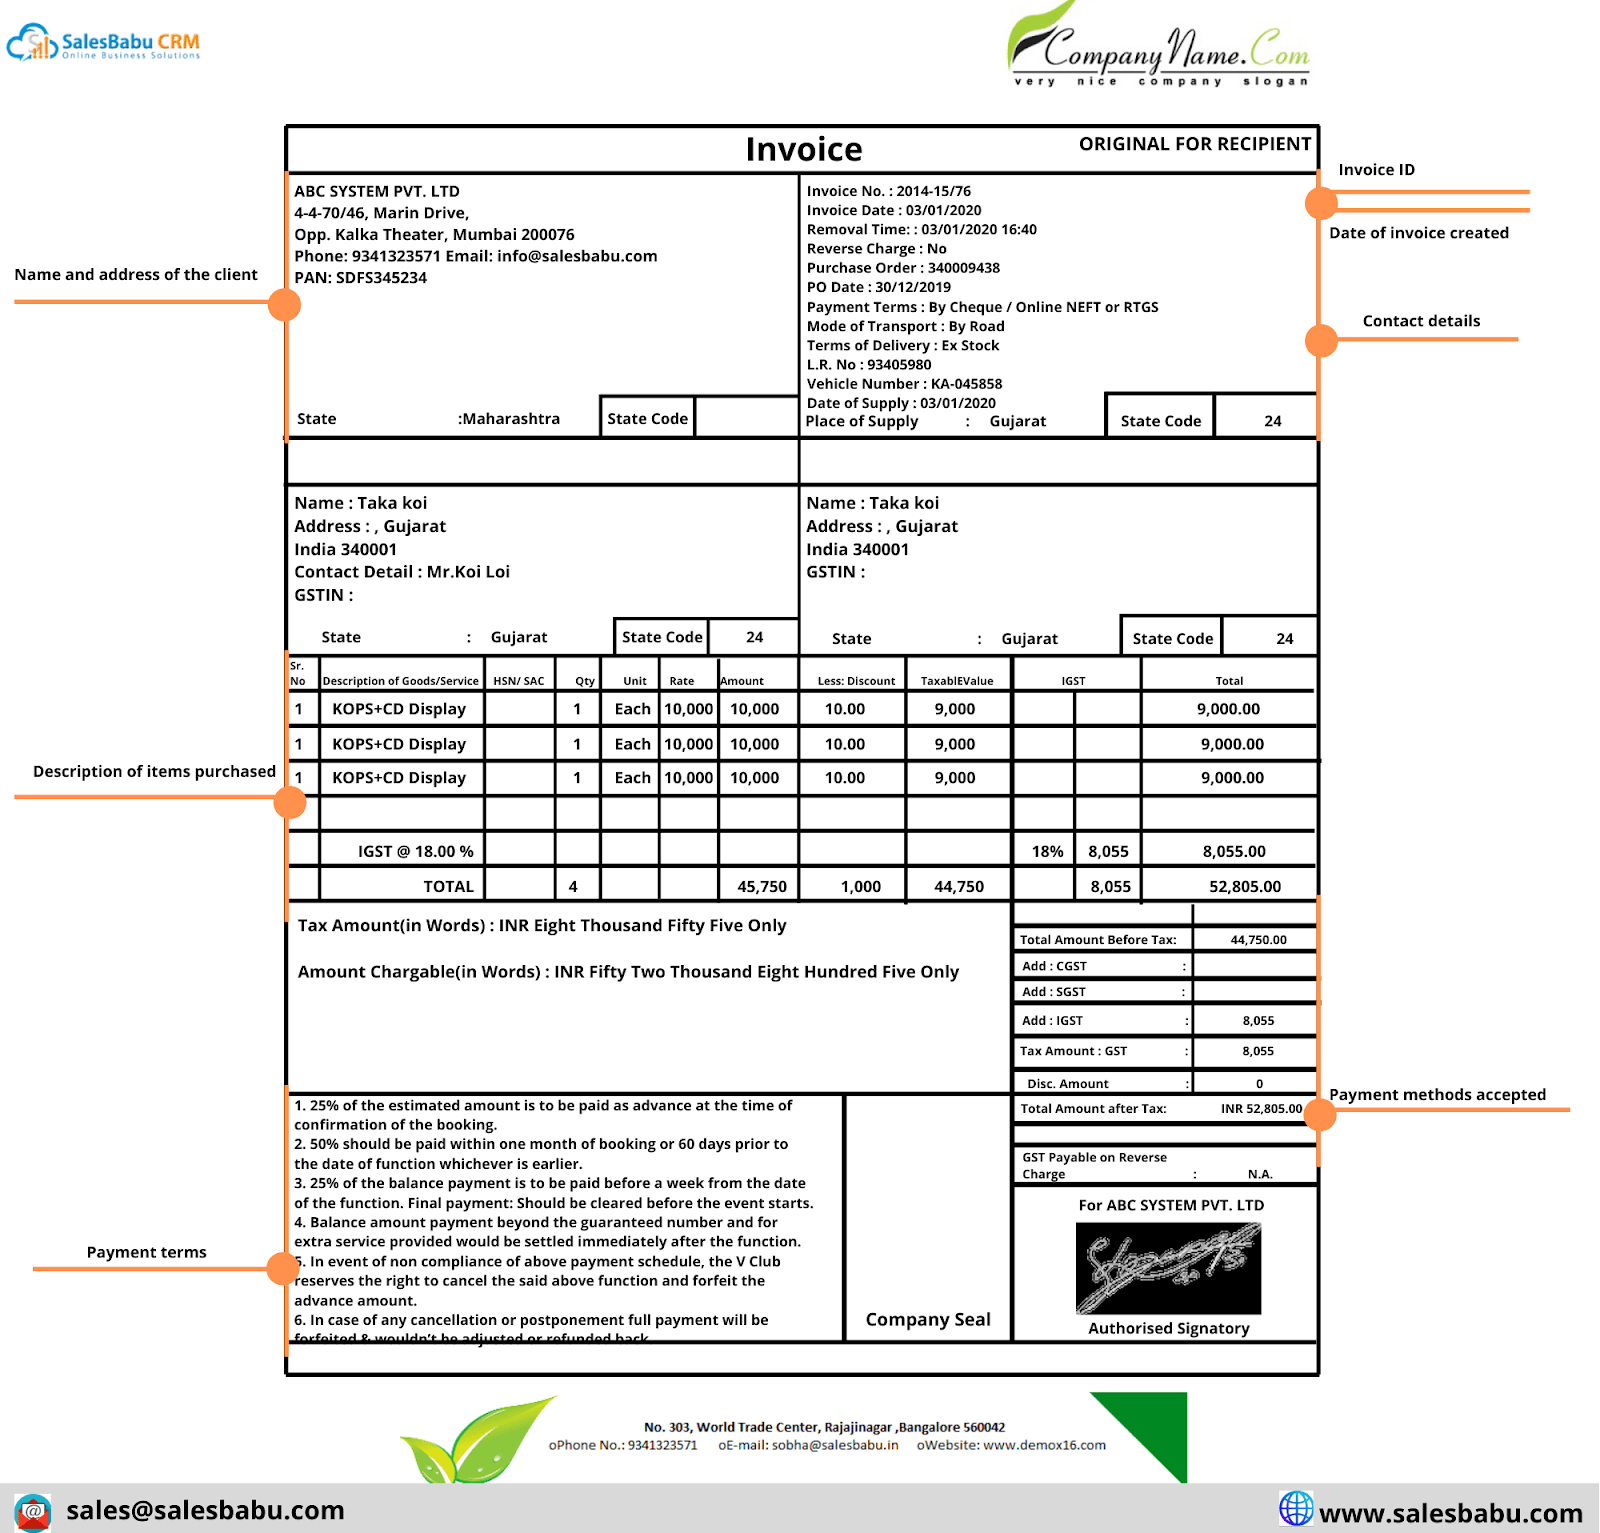 Your detailed invoice